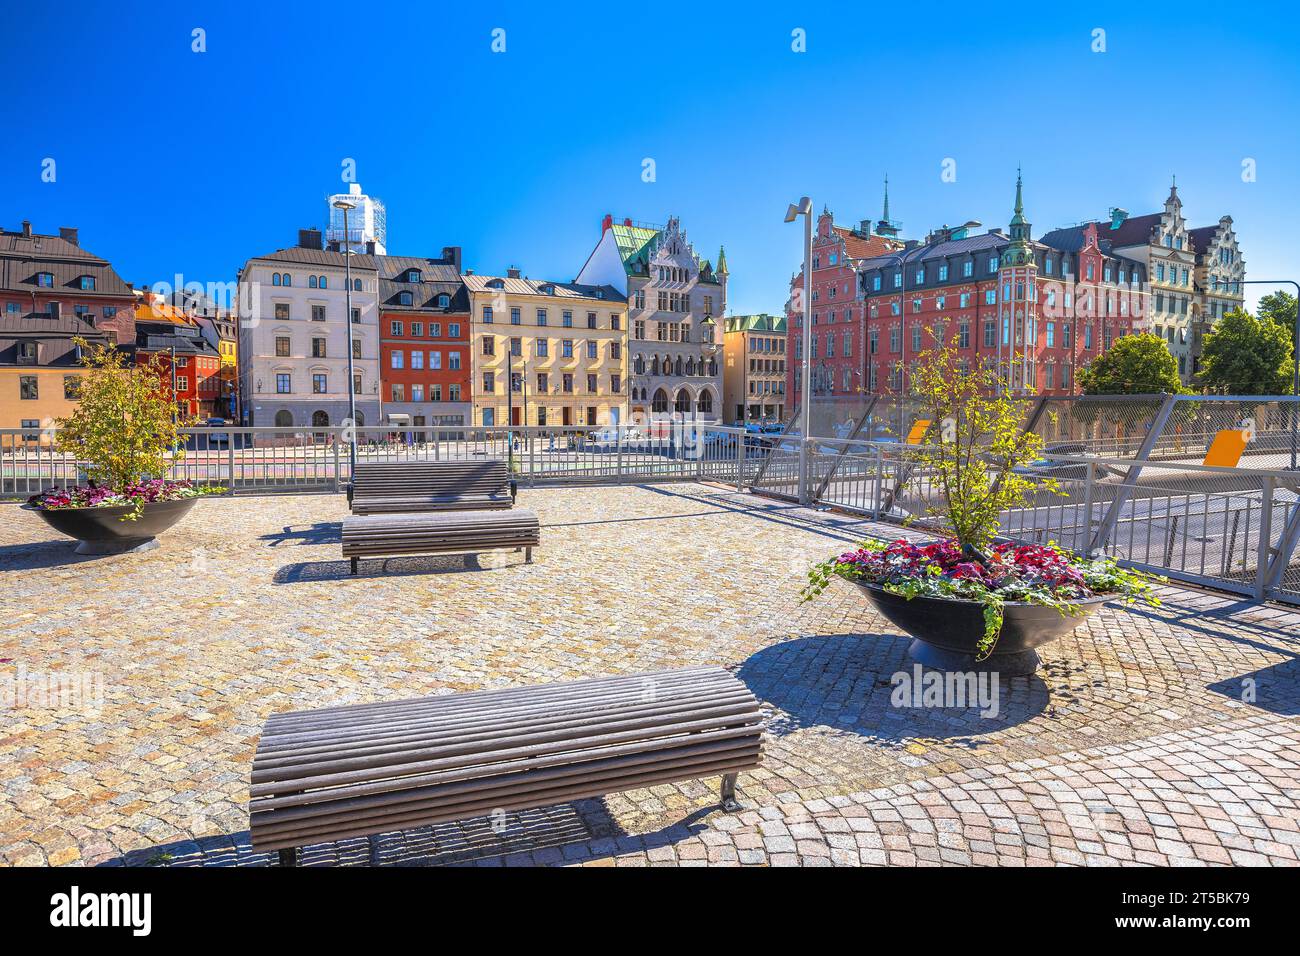 Stockholm city center historic architecture view, Riddarholmen square, capital of Sweden Stock Photo